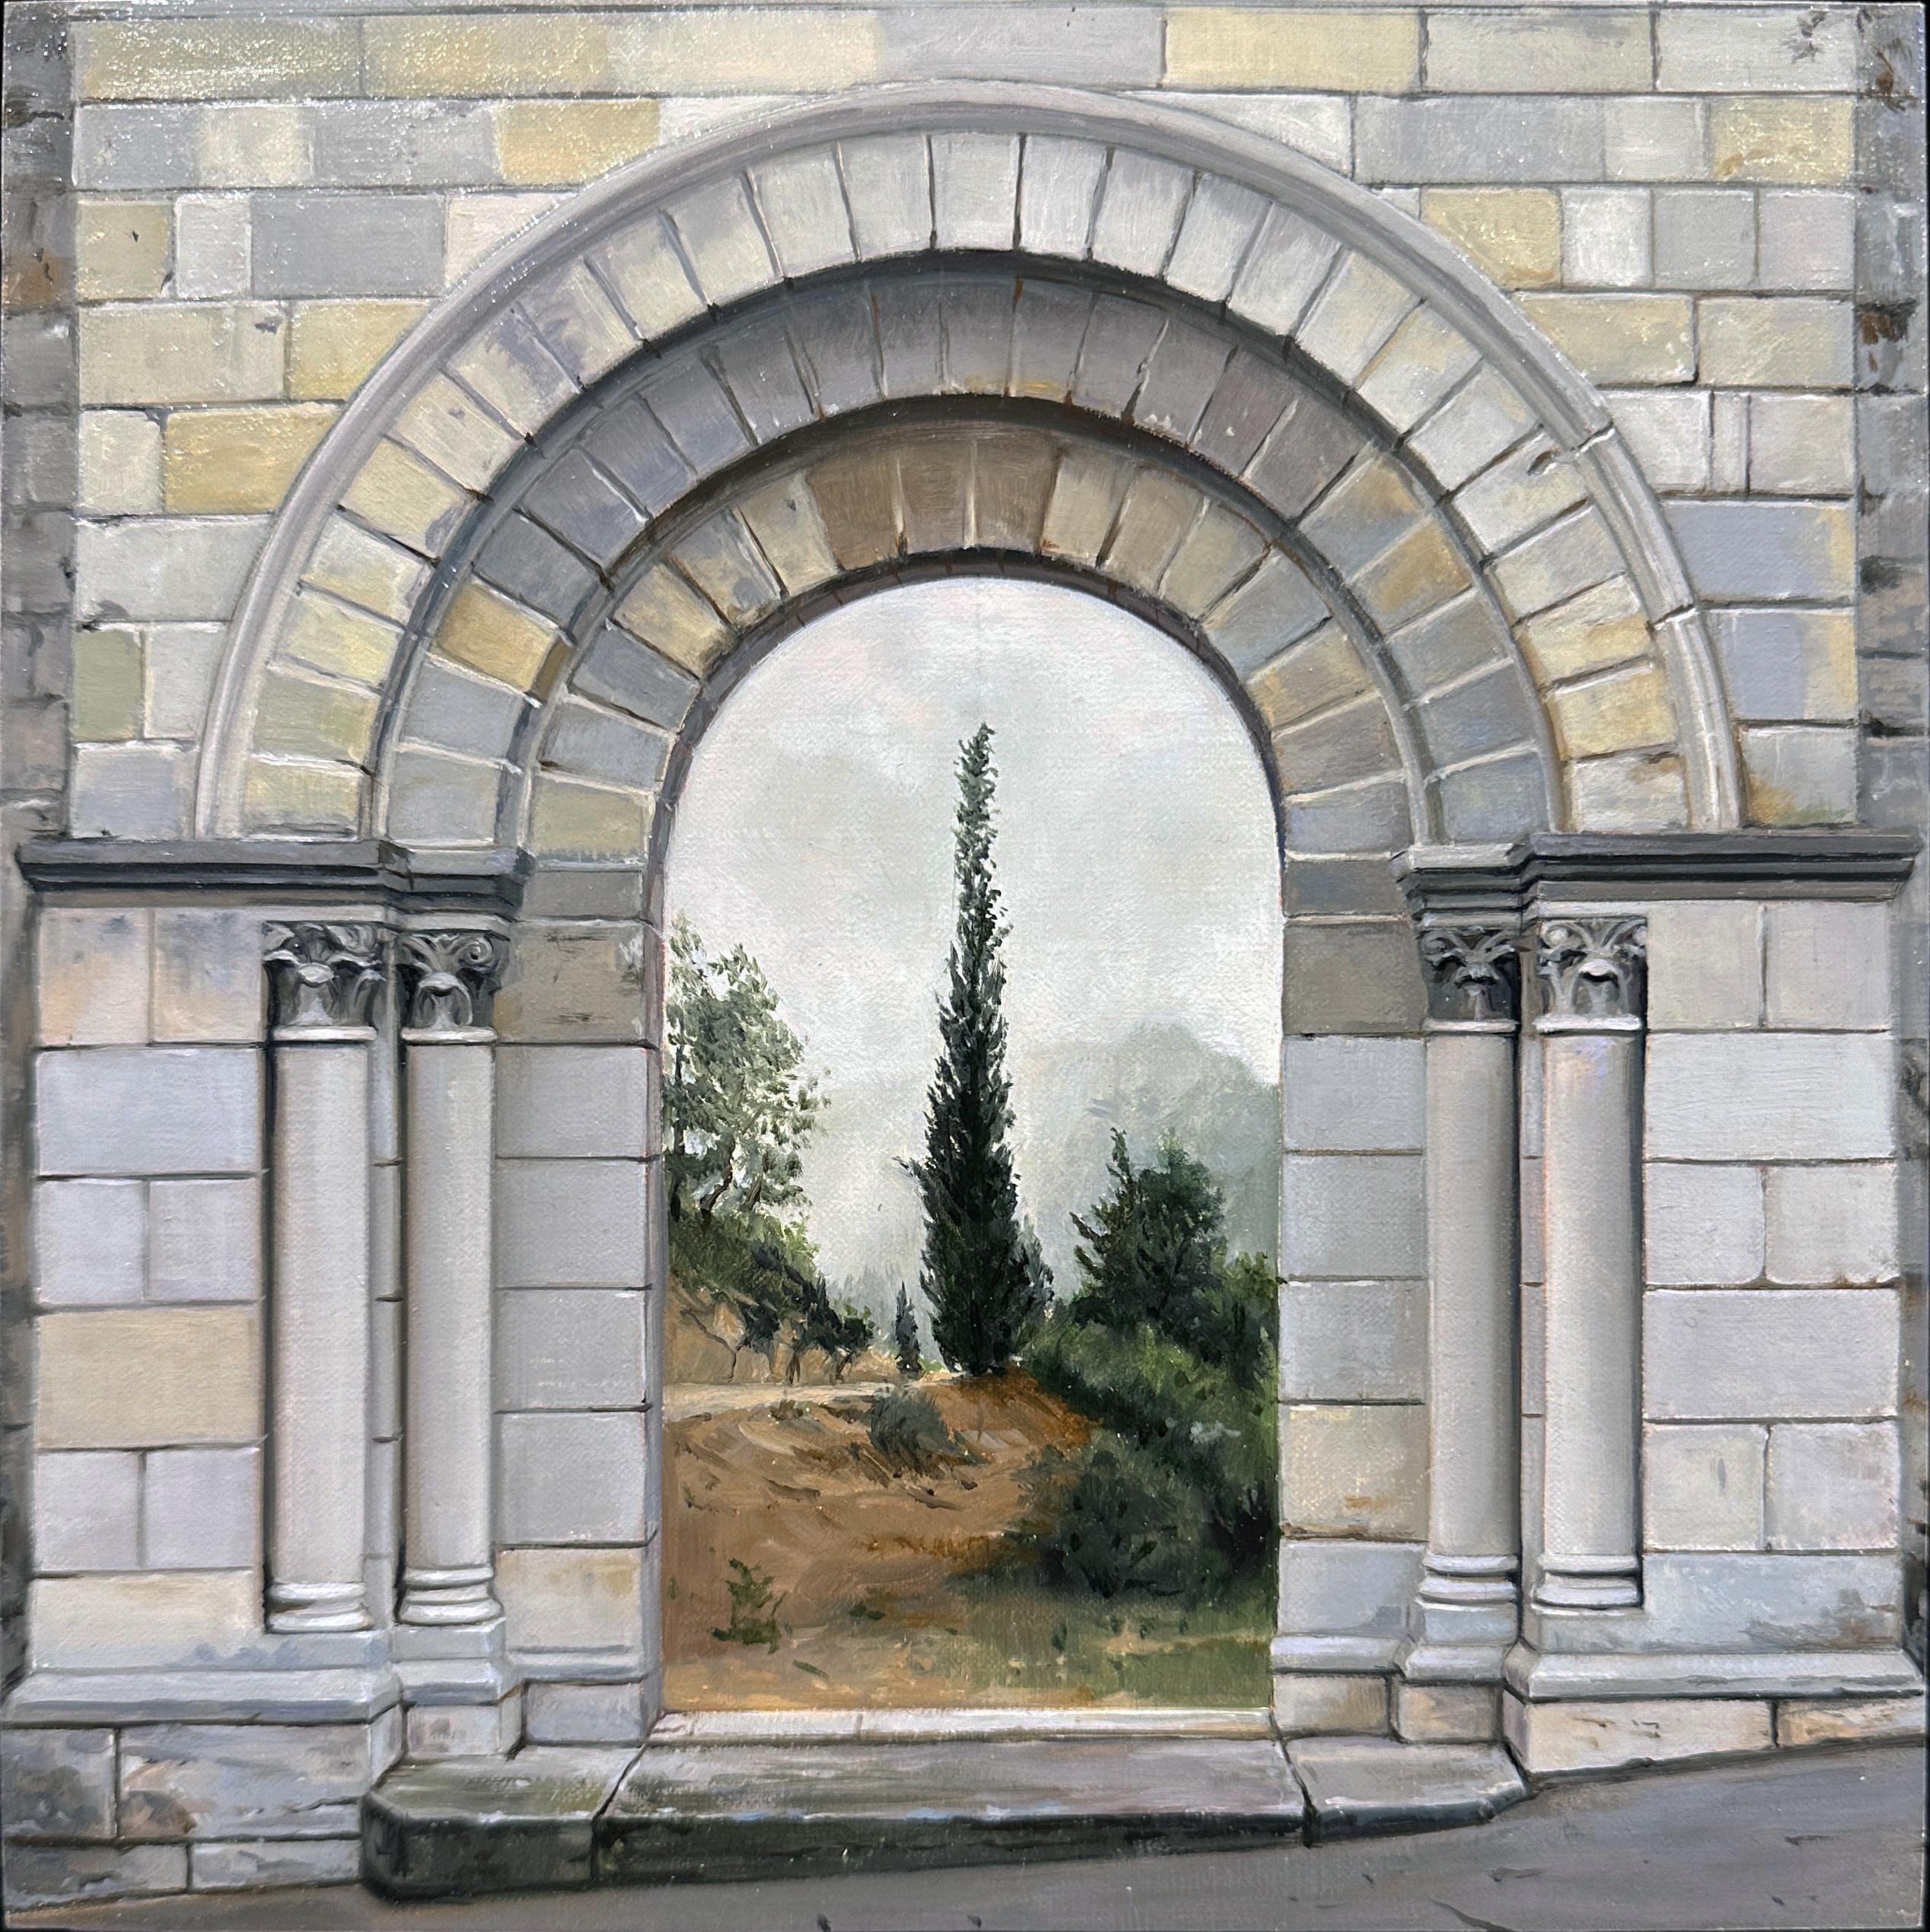 Redempcio - Ancient Architectural Arched Doorways Leading to Misty Landscape - Painting by Carol Pylant